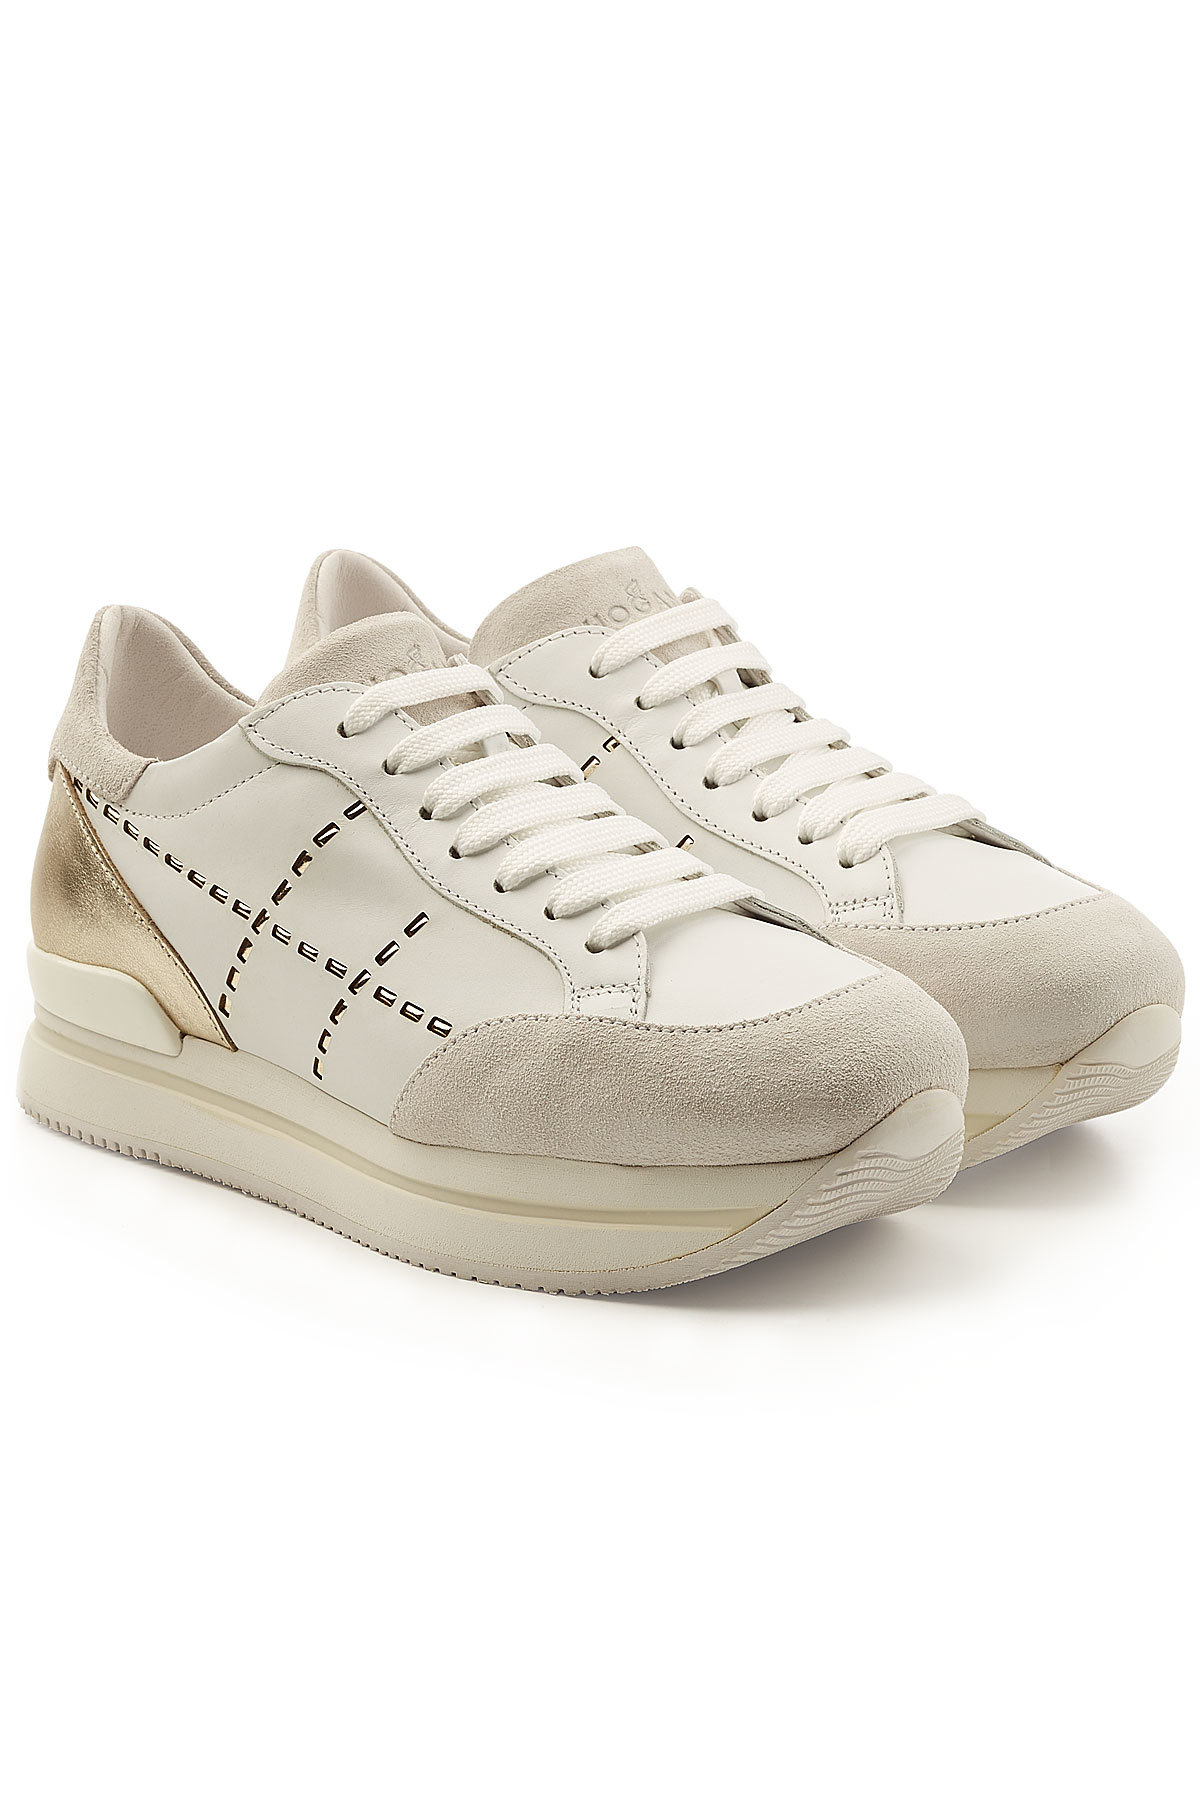 Hogan - Suede and Leather Platform Sneakers